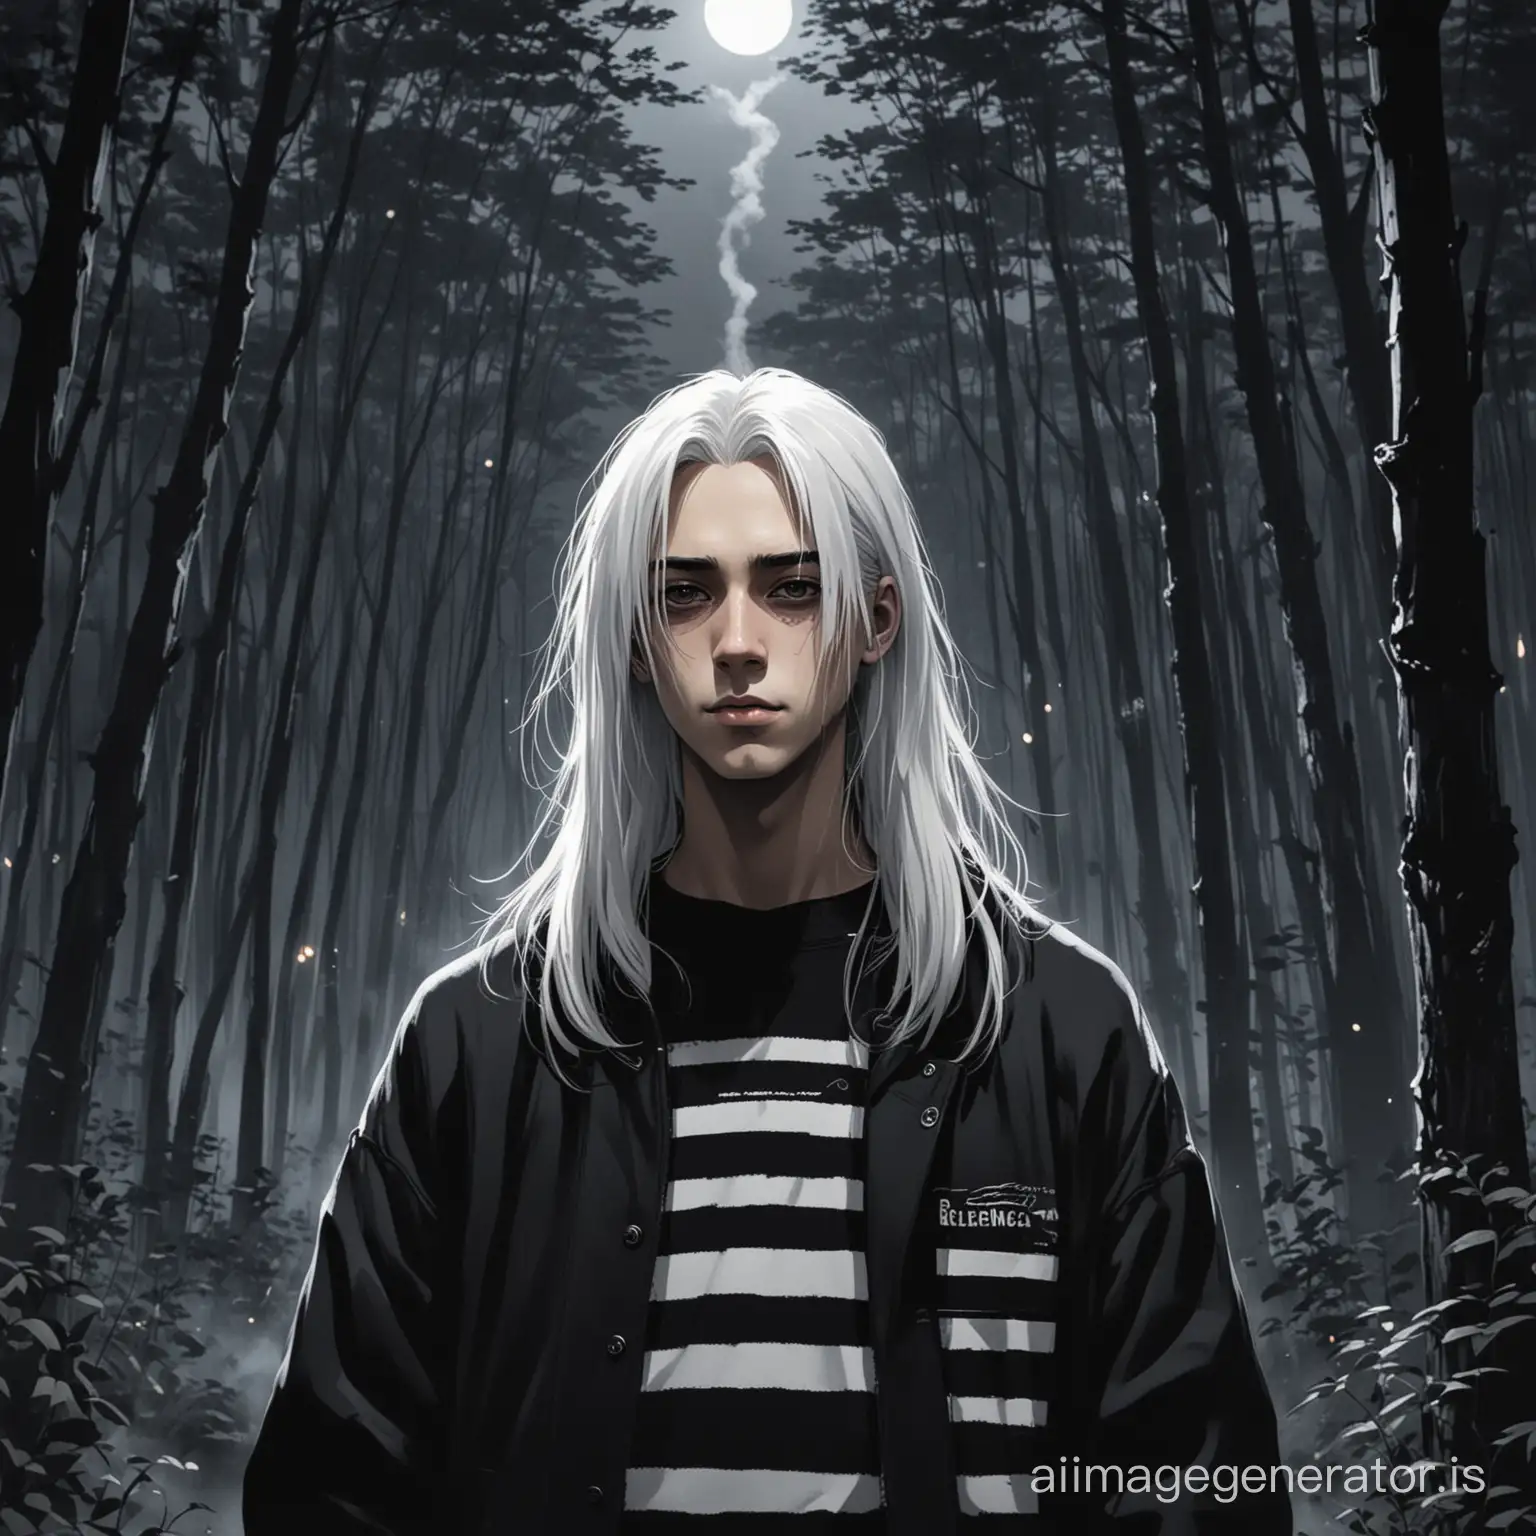 A young man with long white hair dressed in a sweater with wide black and white stripes over which a black jacket with the logo of the Balenciaga brand is thrown smokes a cigarette at night in the forest in a grim style of horror anime. anime